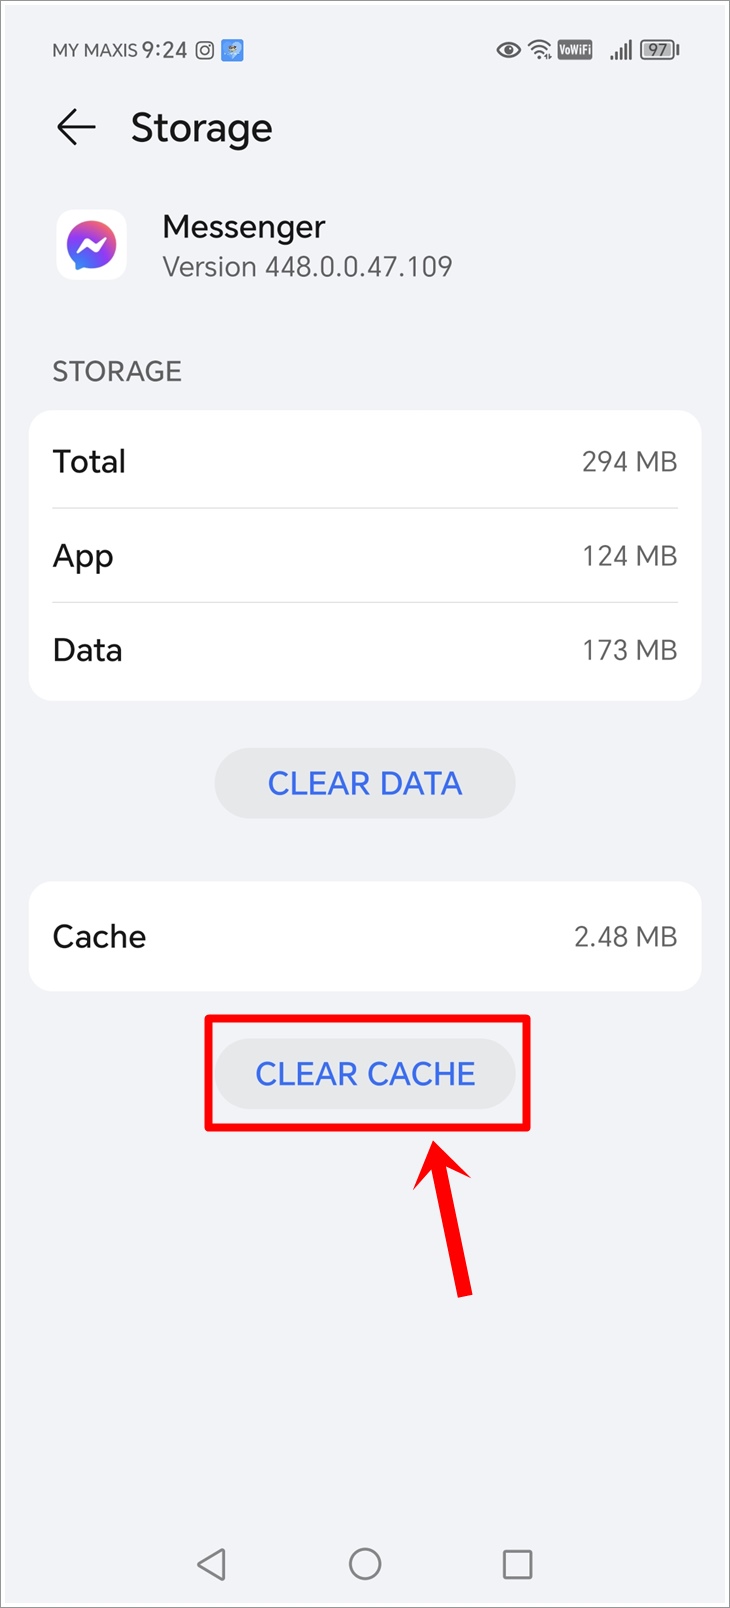 Fix Messenger 'waiting for network' error: This is a screenshot of the Storage page for the Messenger app on an Android phone, with the 'Clear Cache' button highlighted.